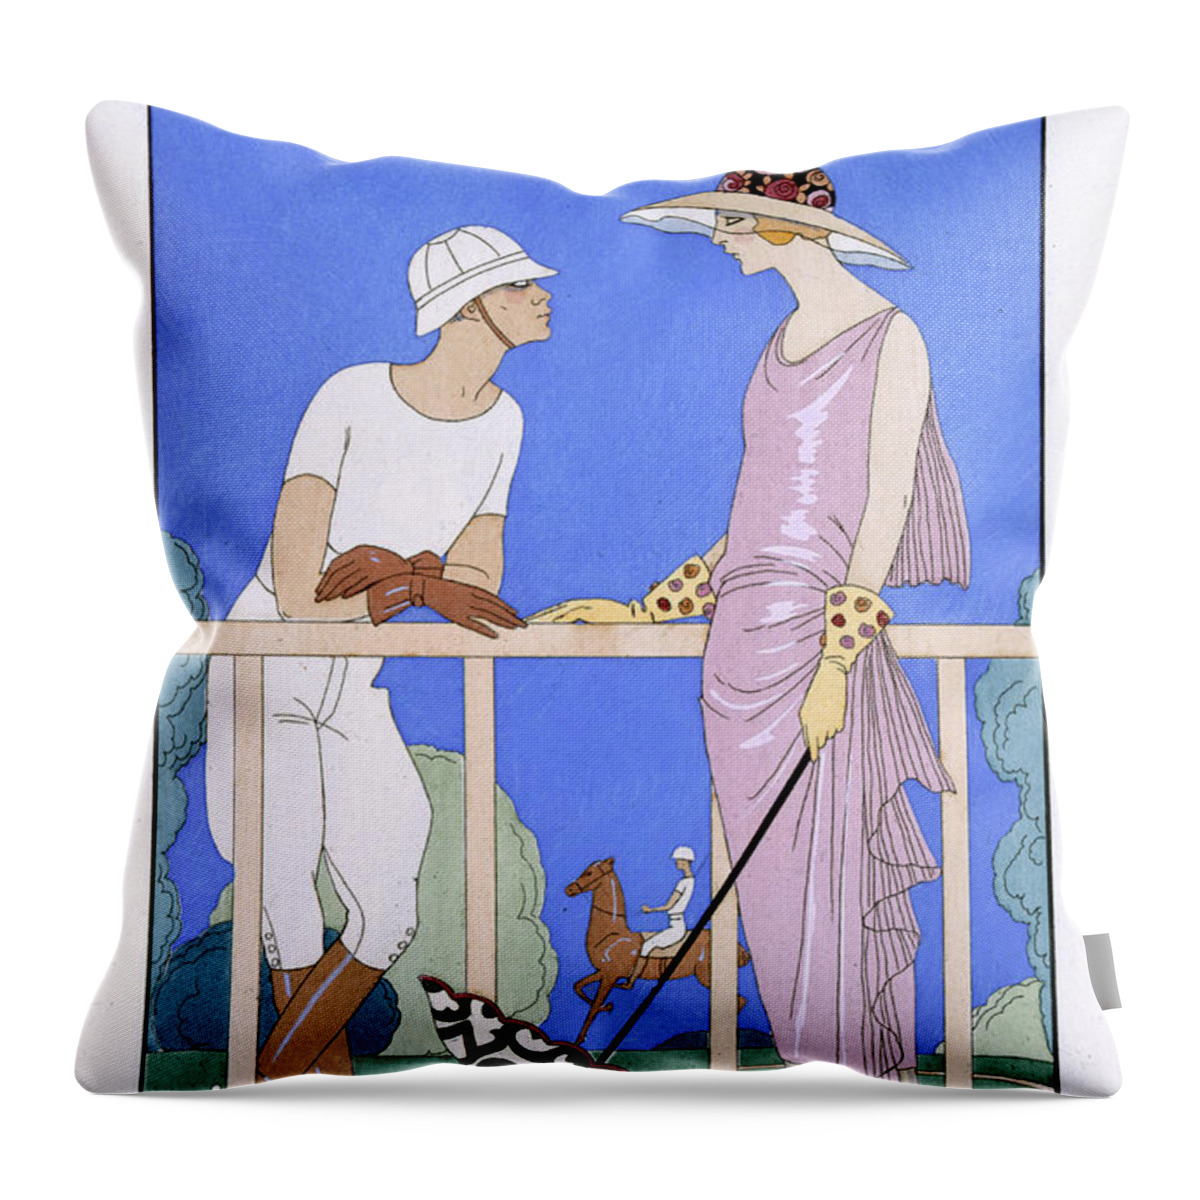 Au Polo Throw Pillow featuring the painting At Polo by Georges Barbier